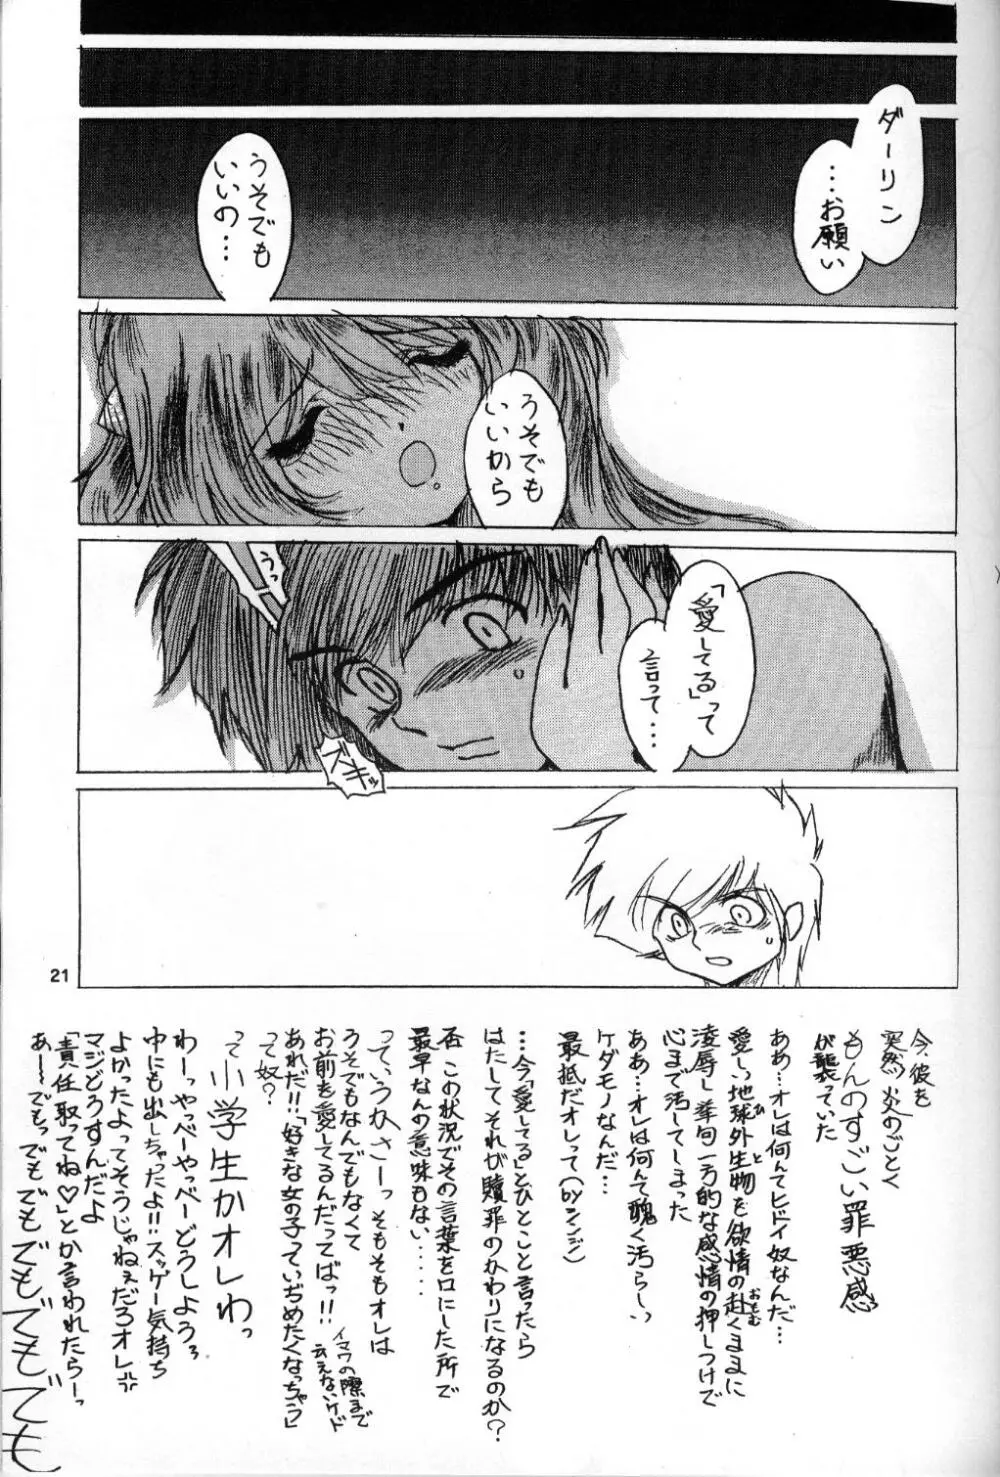 Naked Dream Lunatic Volume 1 Page.20